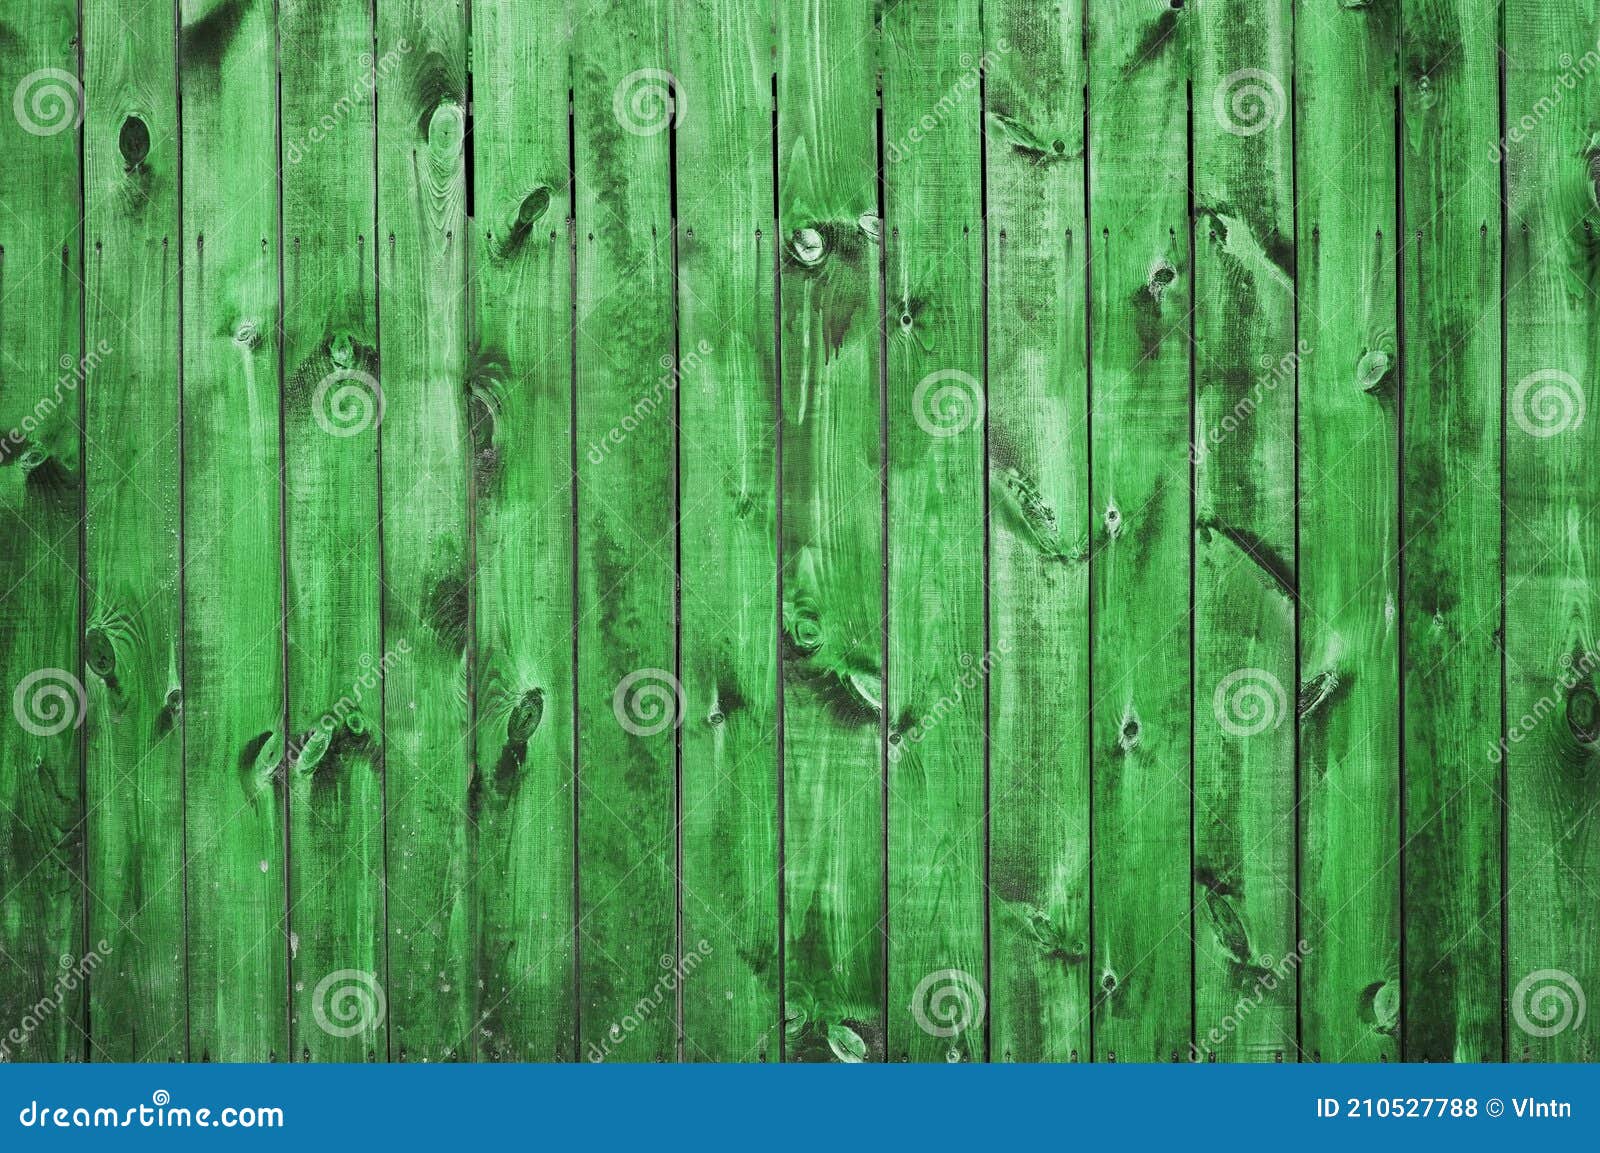 Old Wooden Wall Stock Photo, Picture and Royalty Free Image. Image